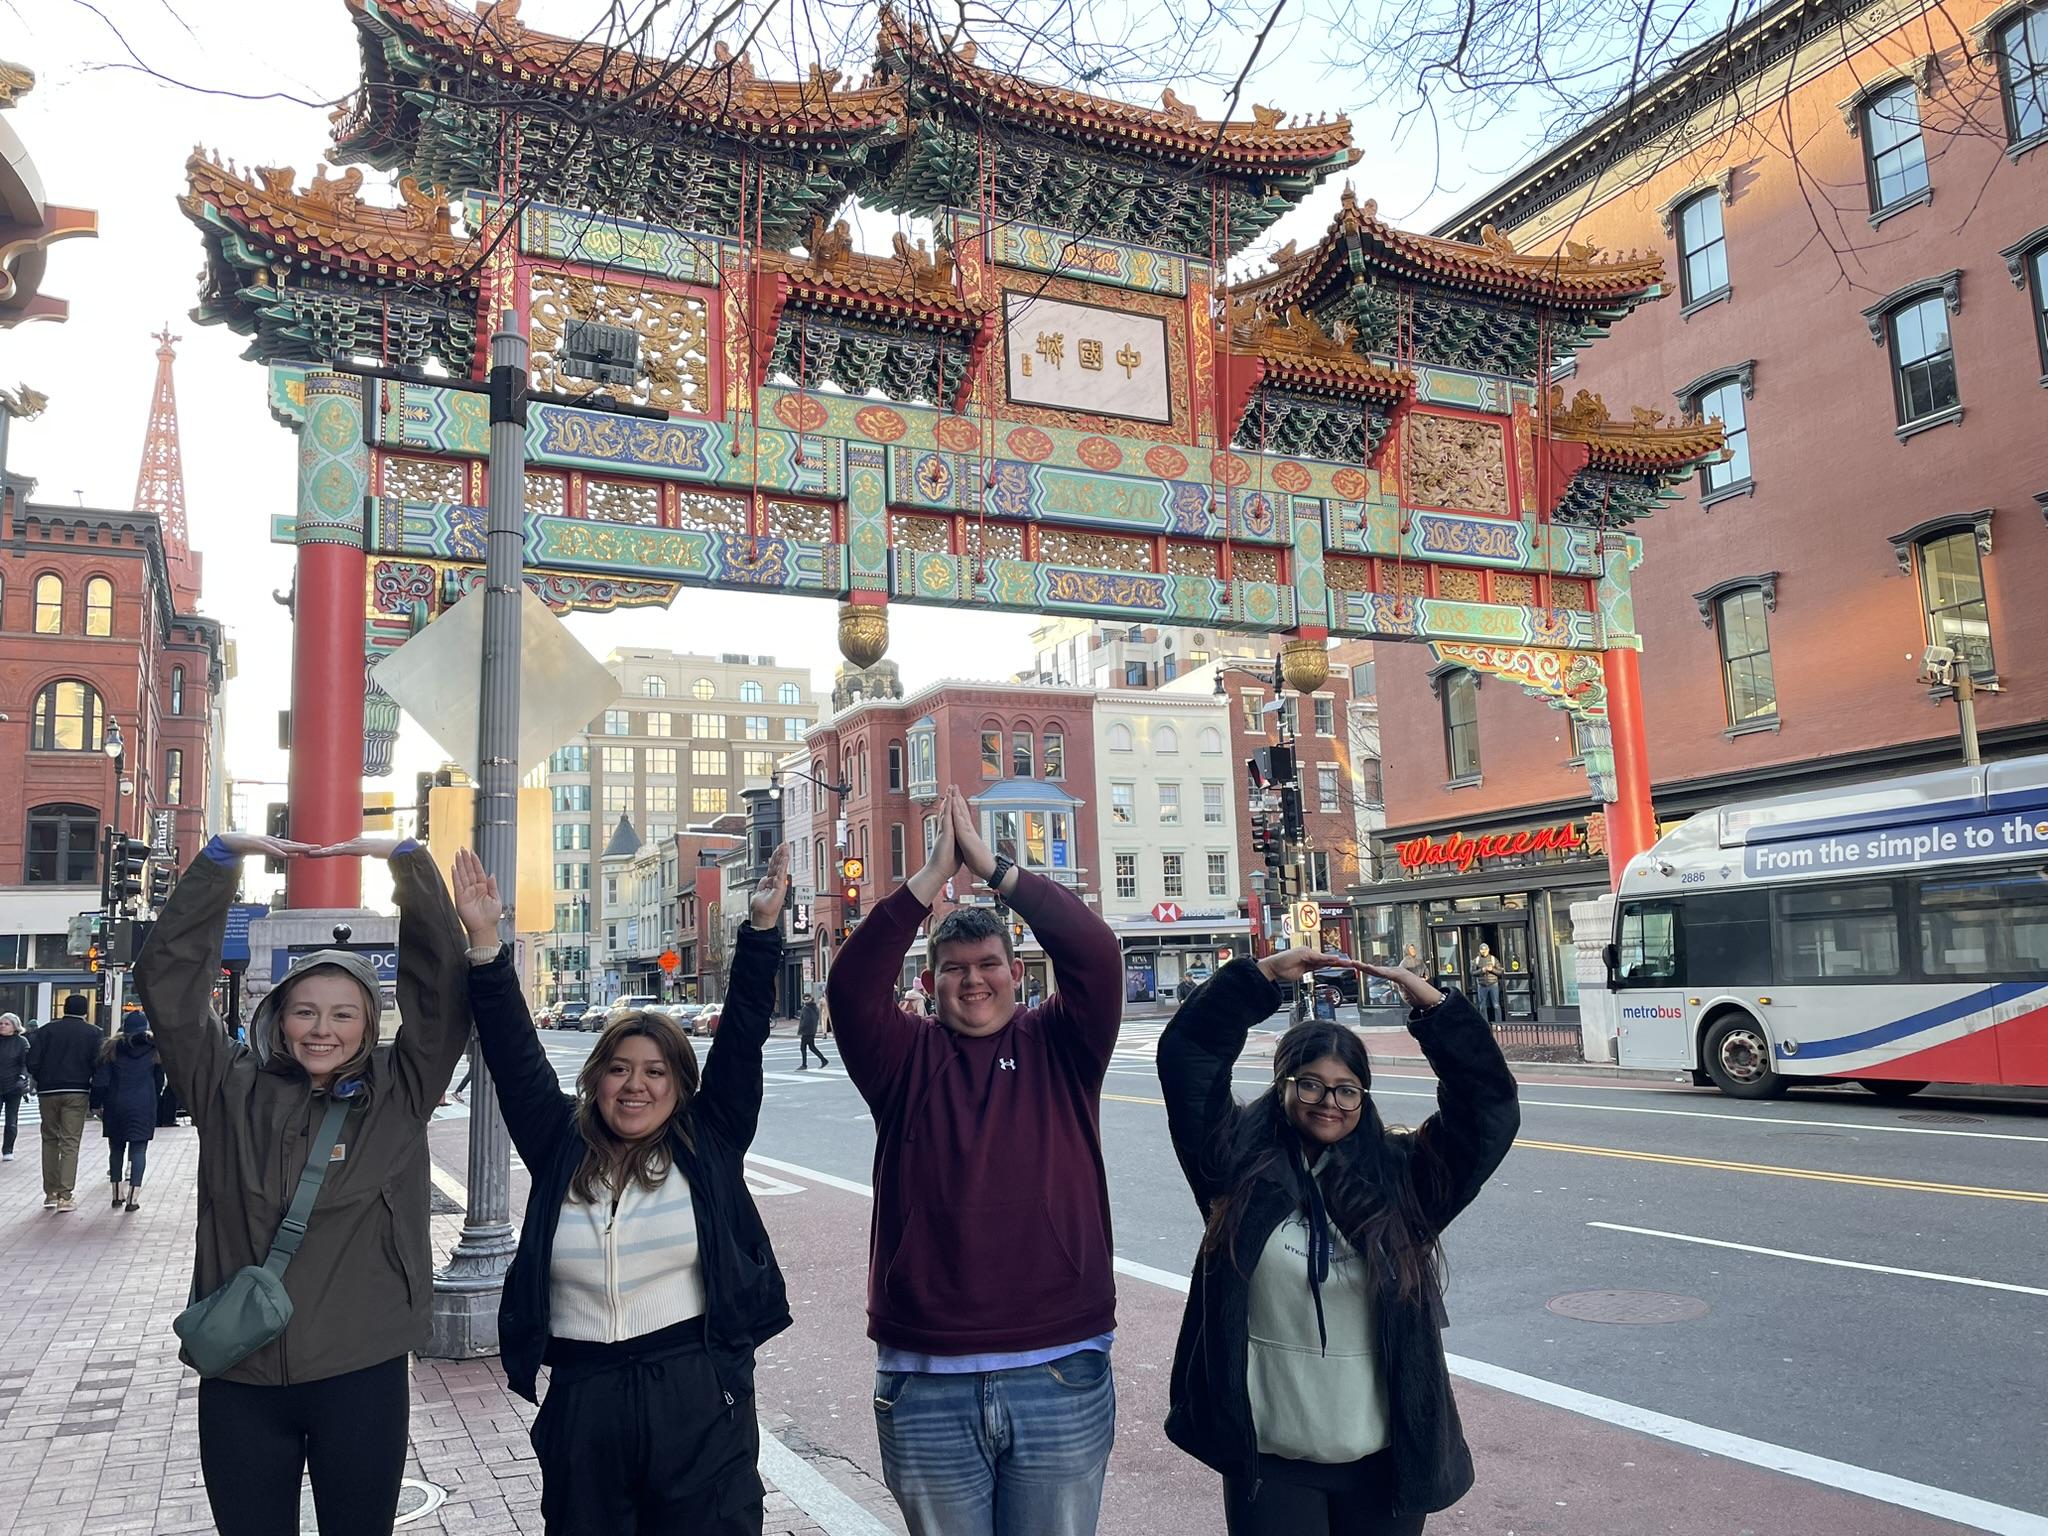 Group of 4 arms up in china town in Washington DC